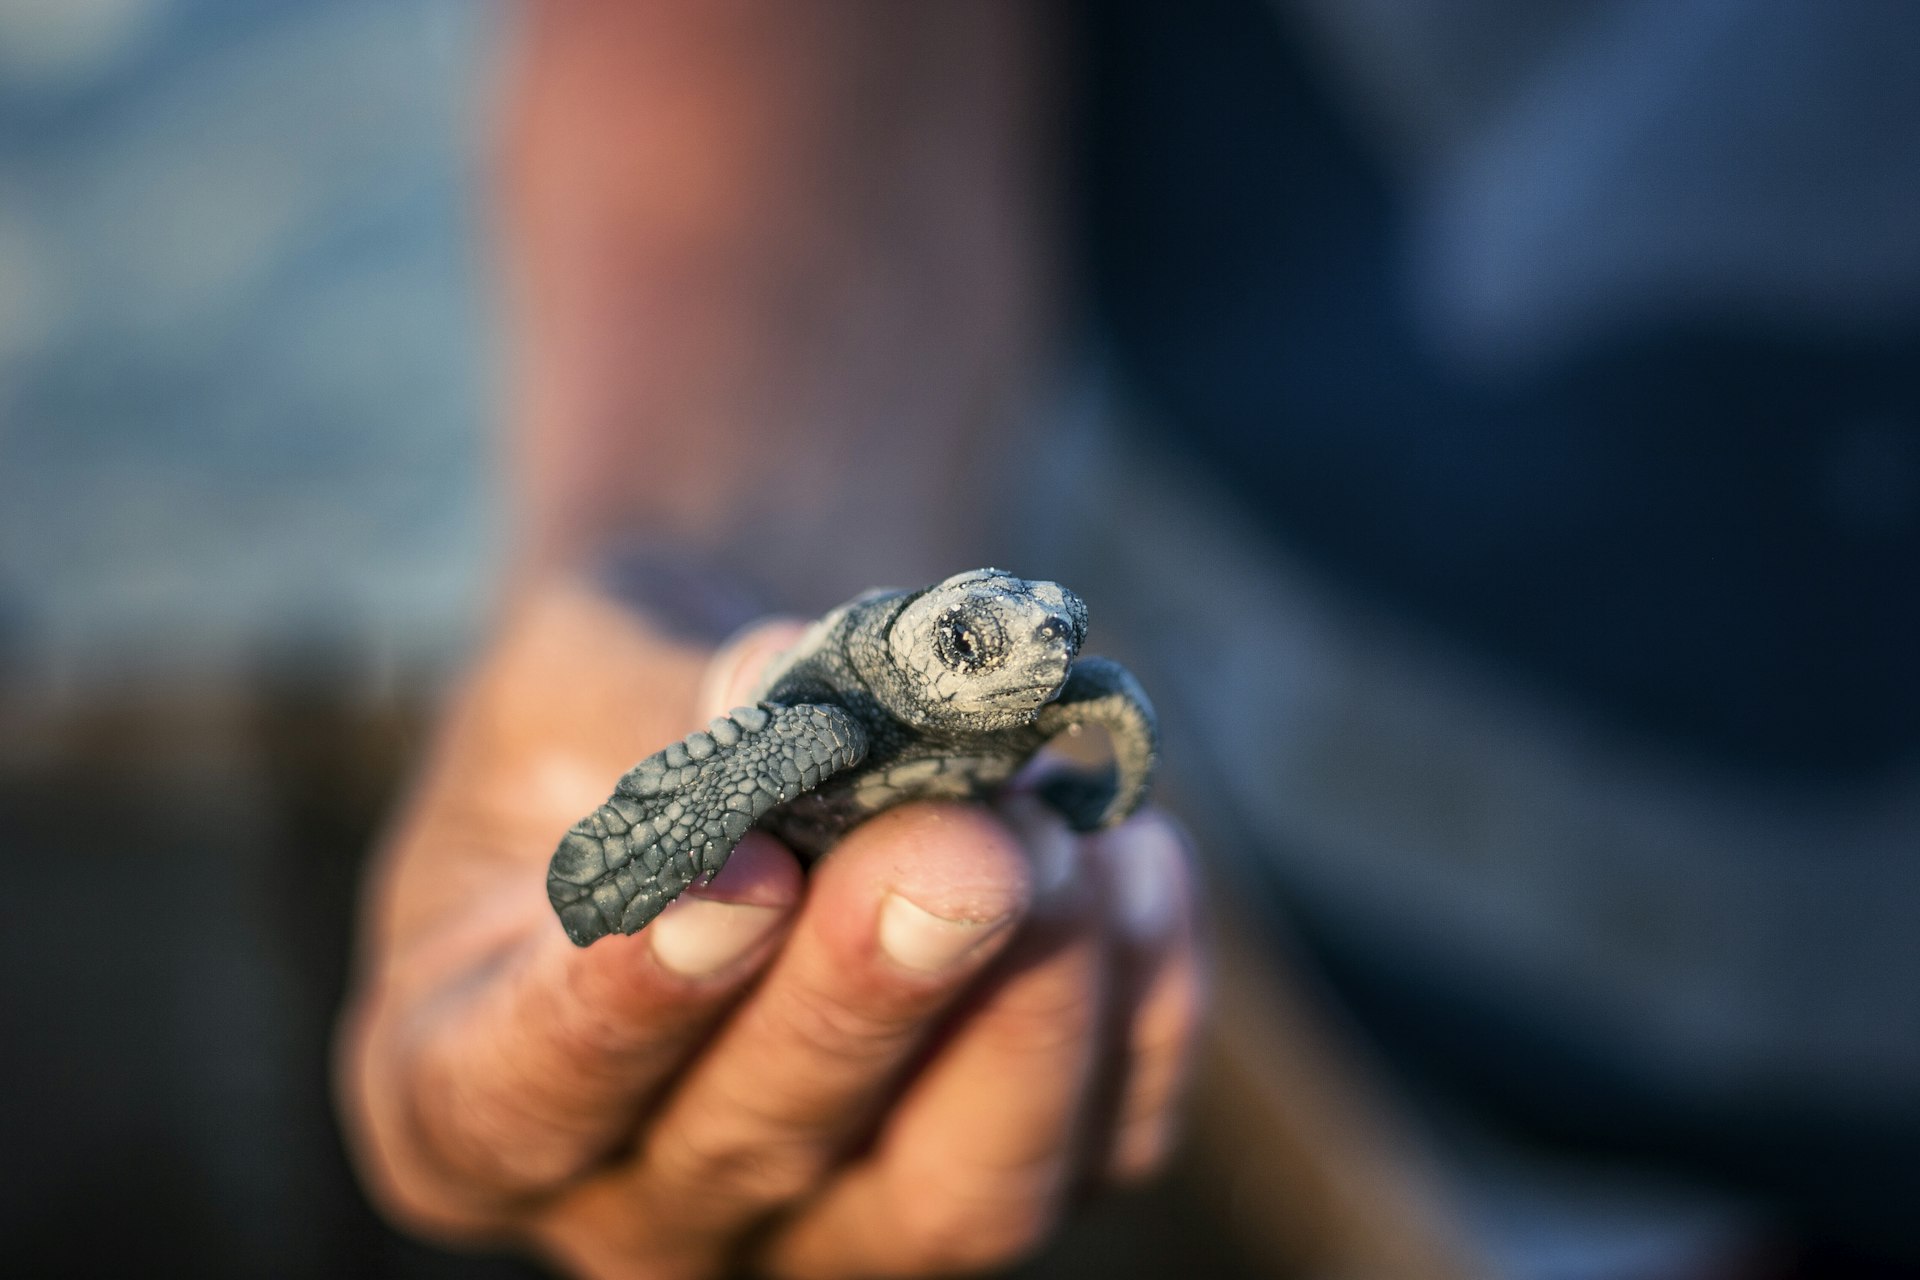 Holding a baby loggerhead sea turtle just before letting it go to open sea, Baja California Sur, Mexico